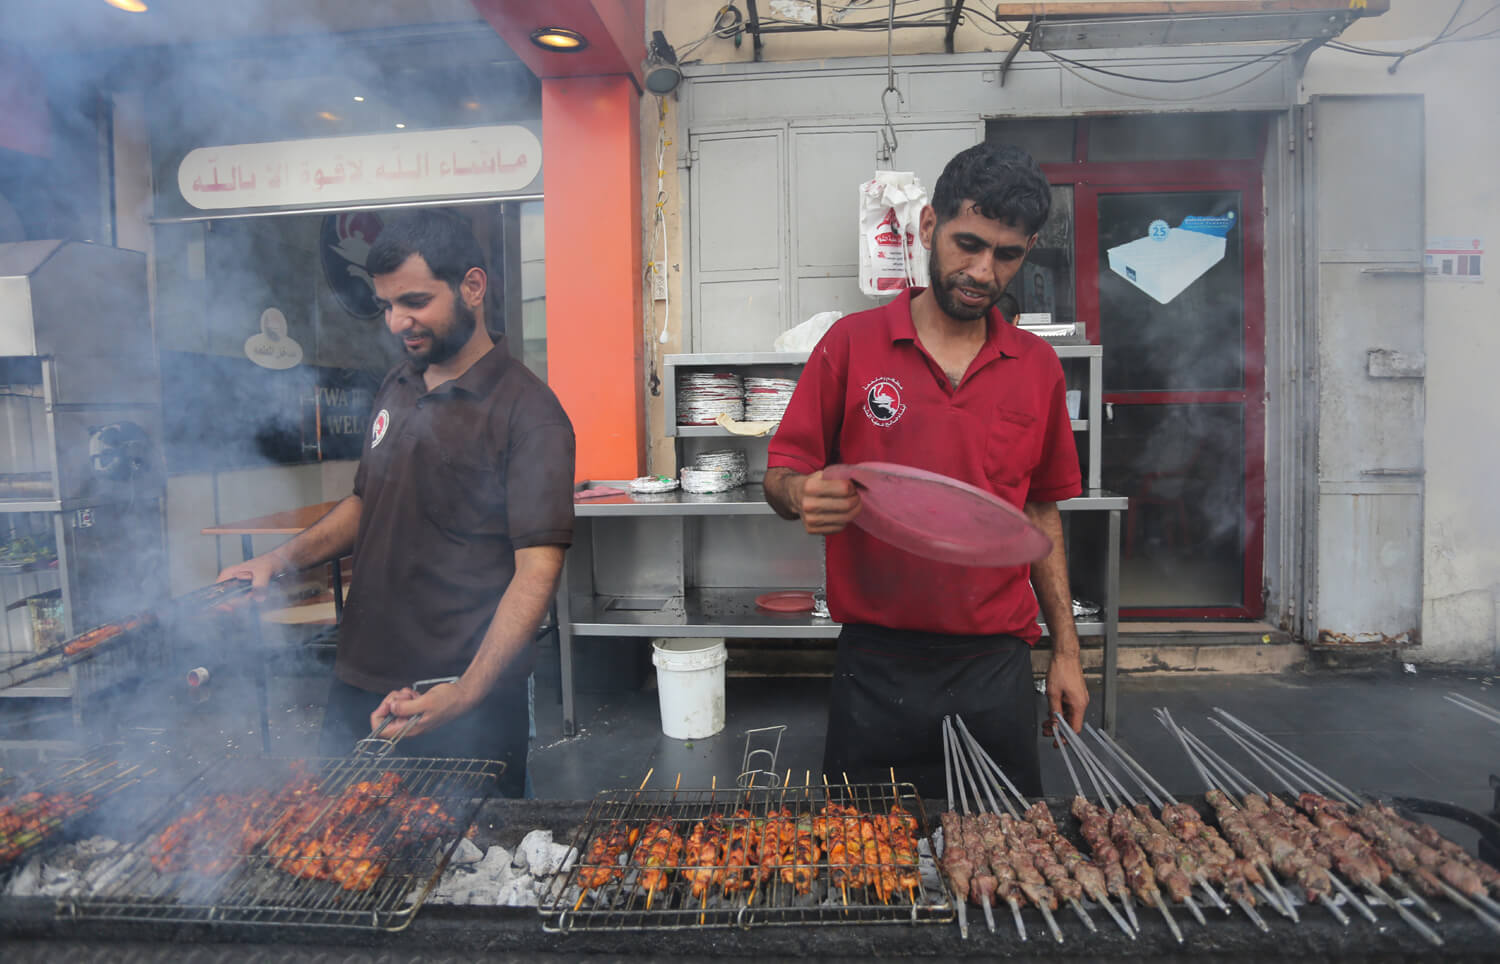 Al-Qasas brothers barbecue in preparation of the iftar meal at a "mashawi" restaurant in Gaza, June 25, 2016. (Photo: Mohammed Asad)